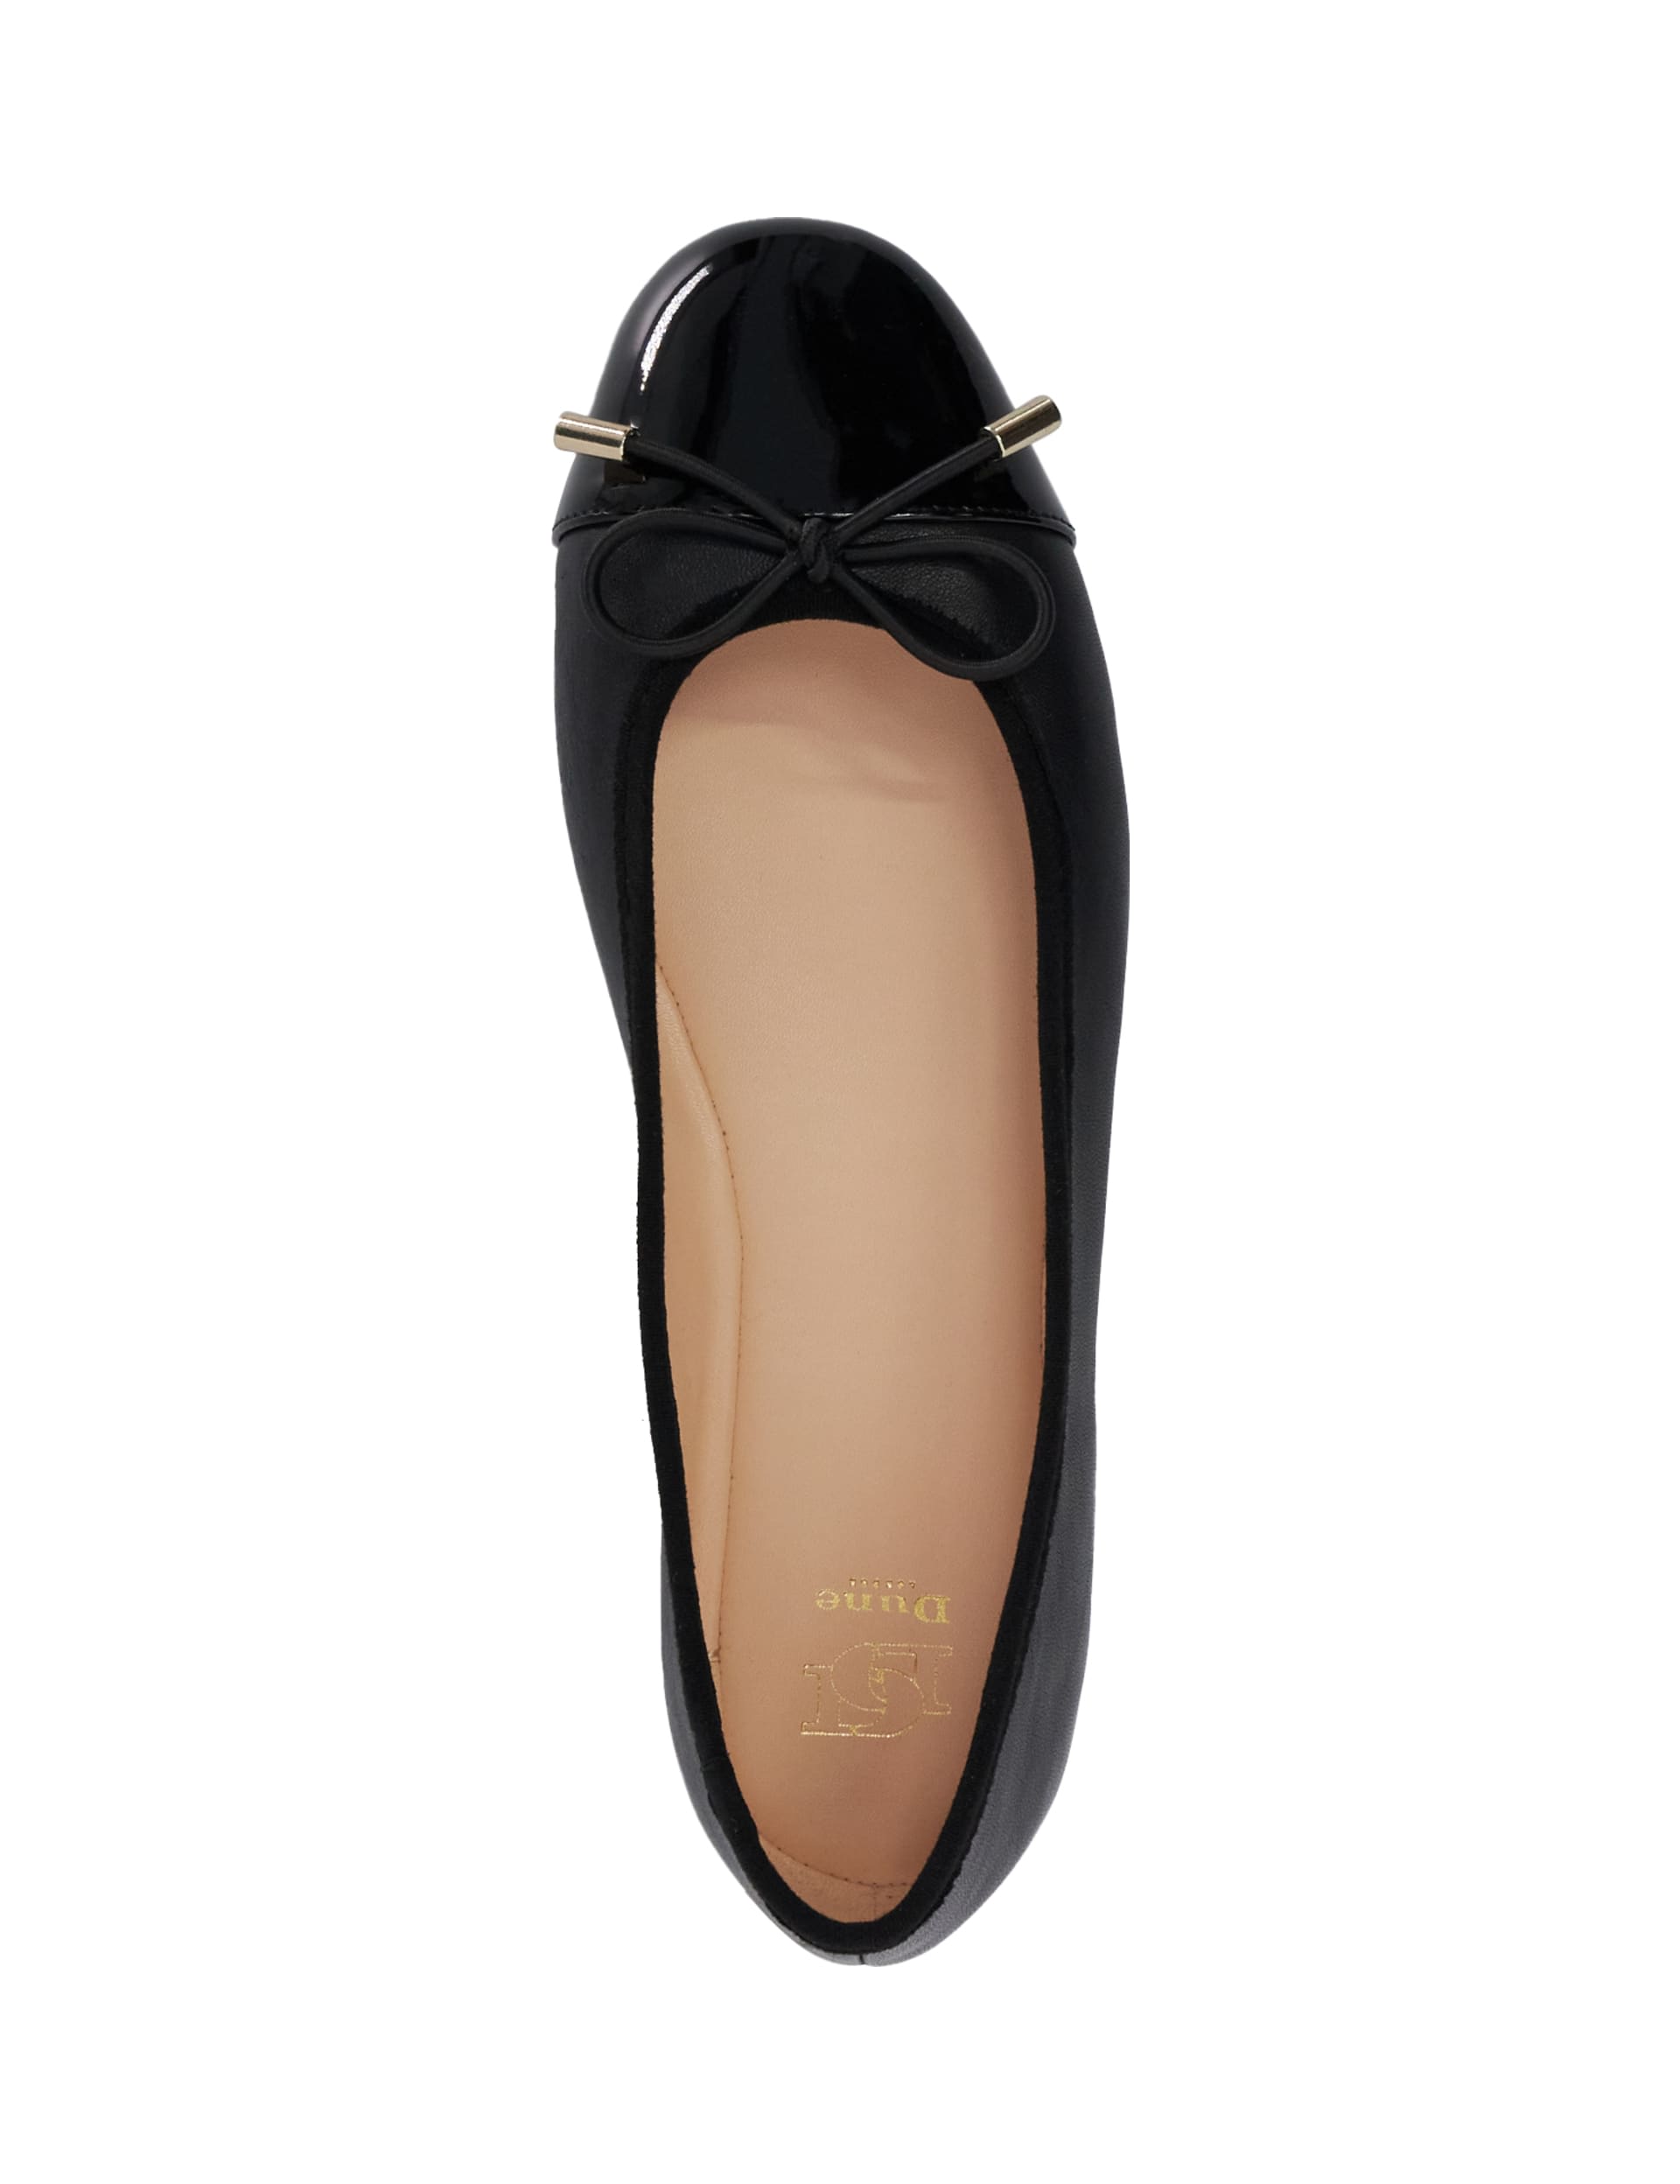 Leather Flat Ballet Pumps 4 of 5